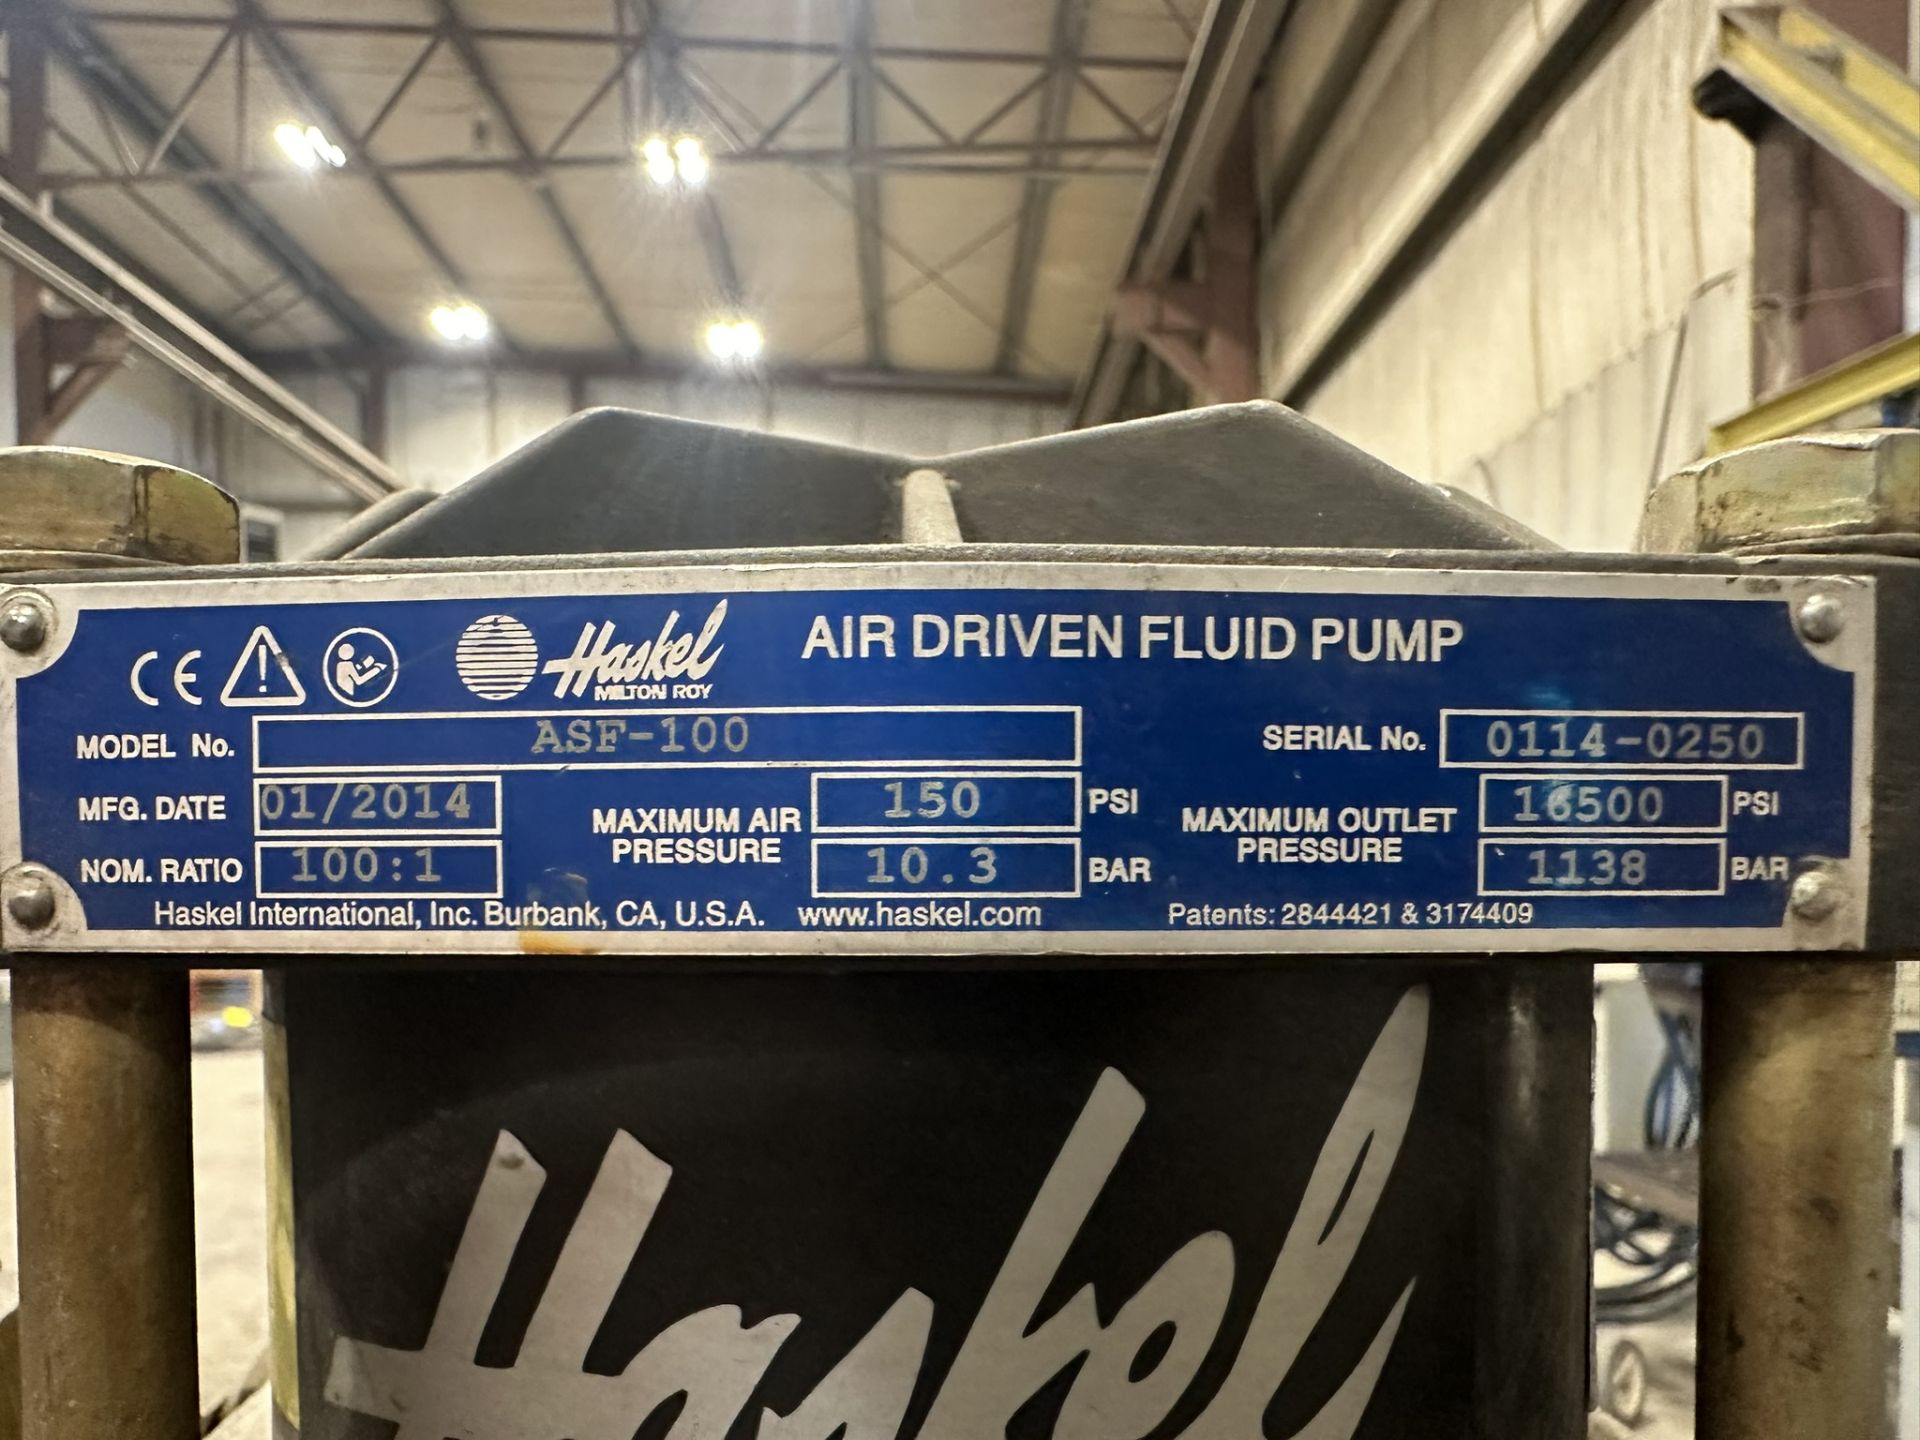 *OFFSITE* HASKEL AIR DRIVEN FLUID PUMP MOD. ASF-100, MAX 15,000 PSI - Image 9 of 9